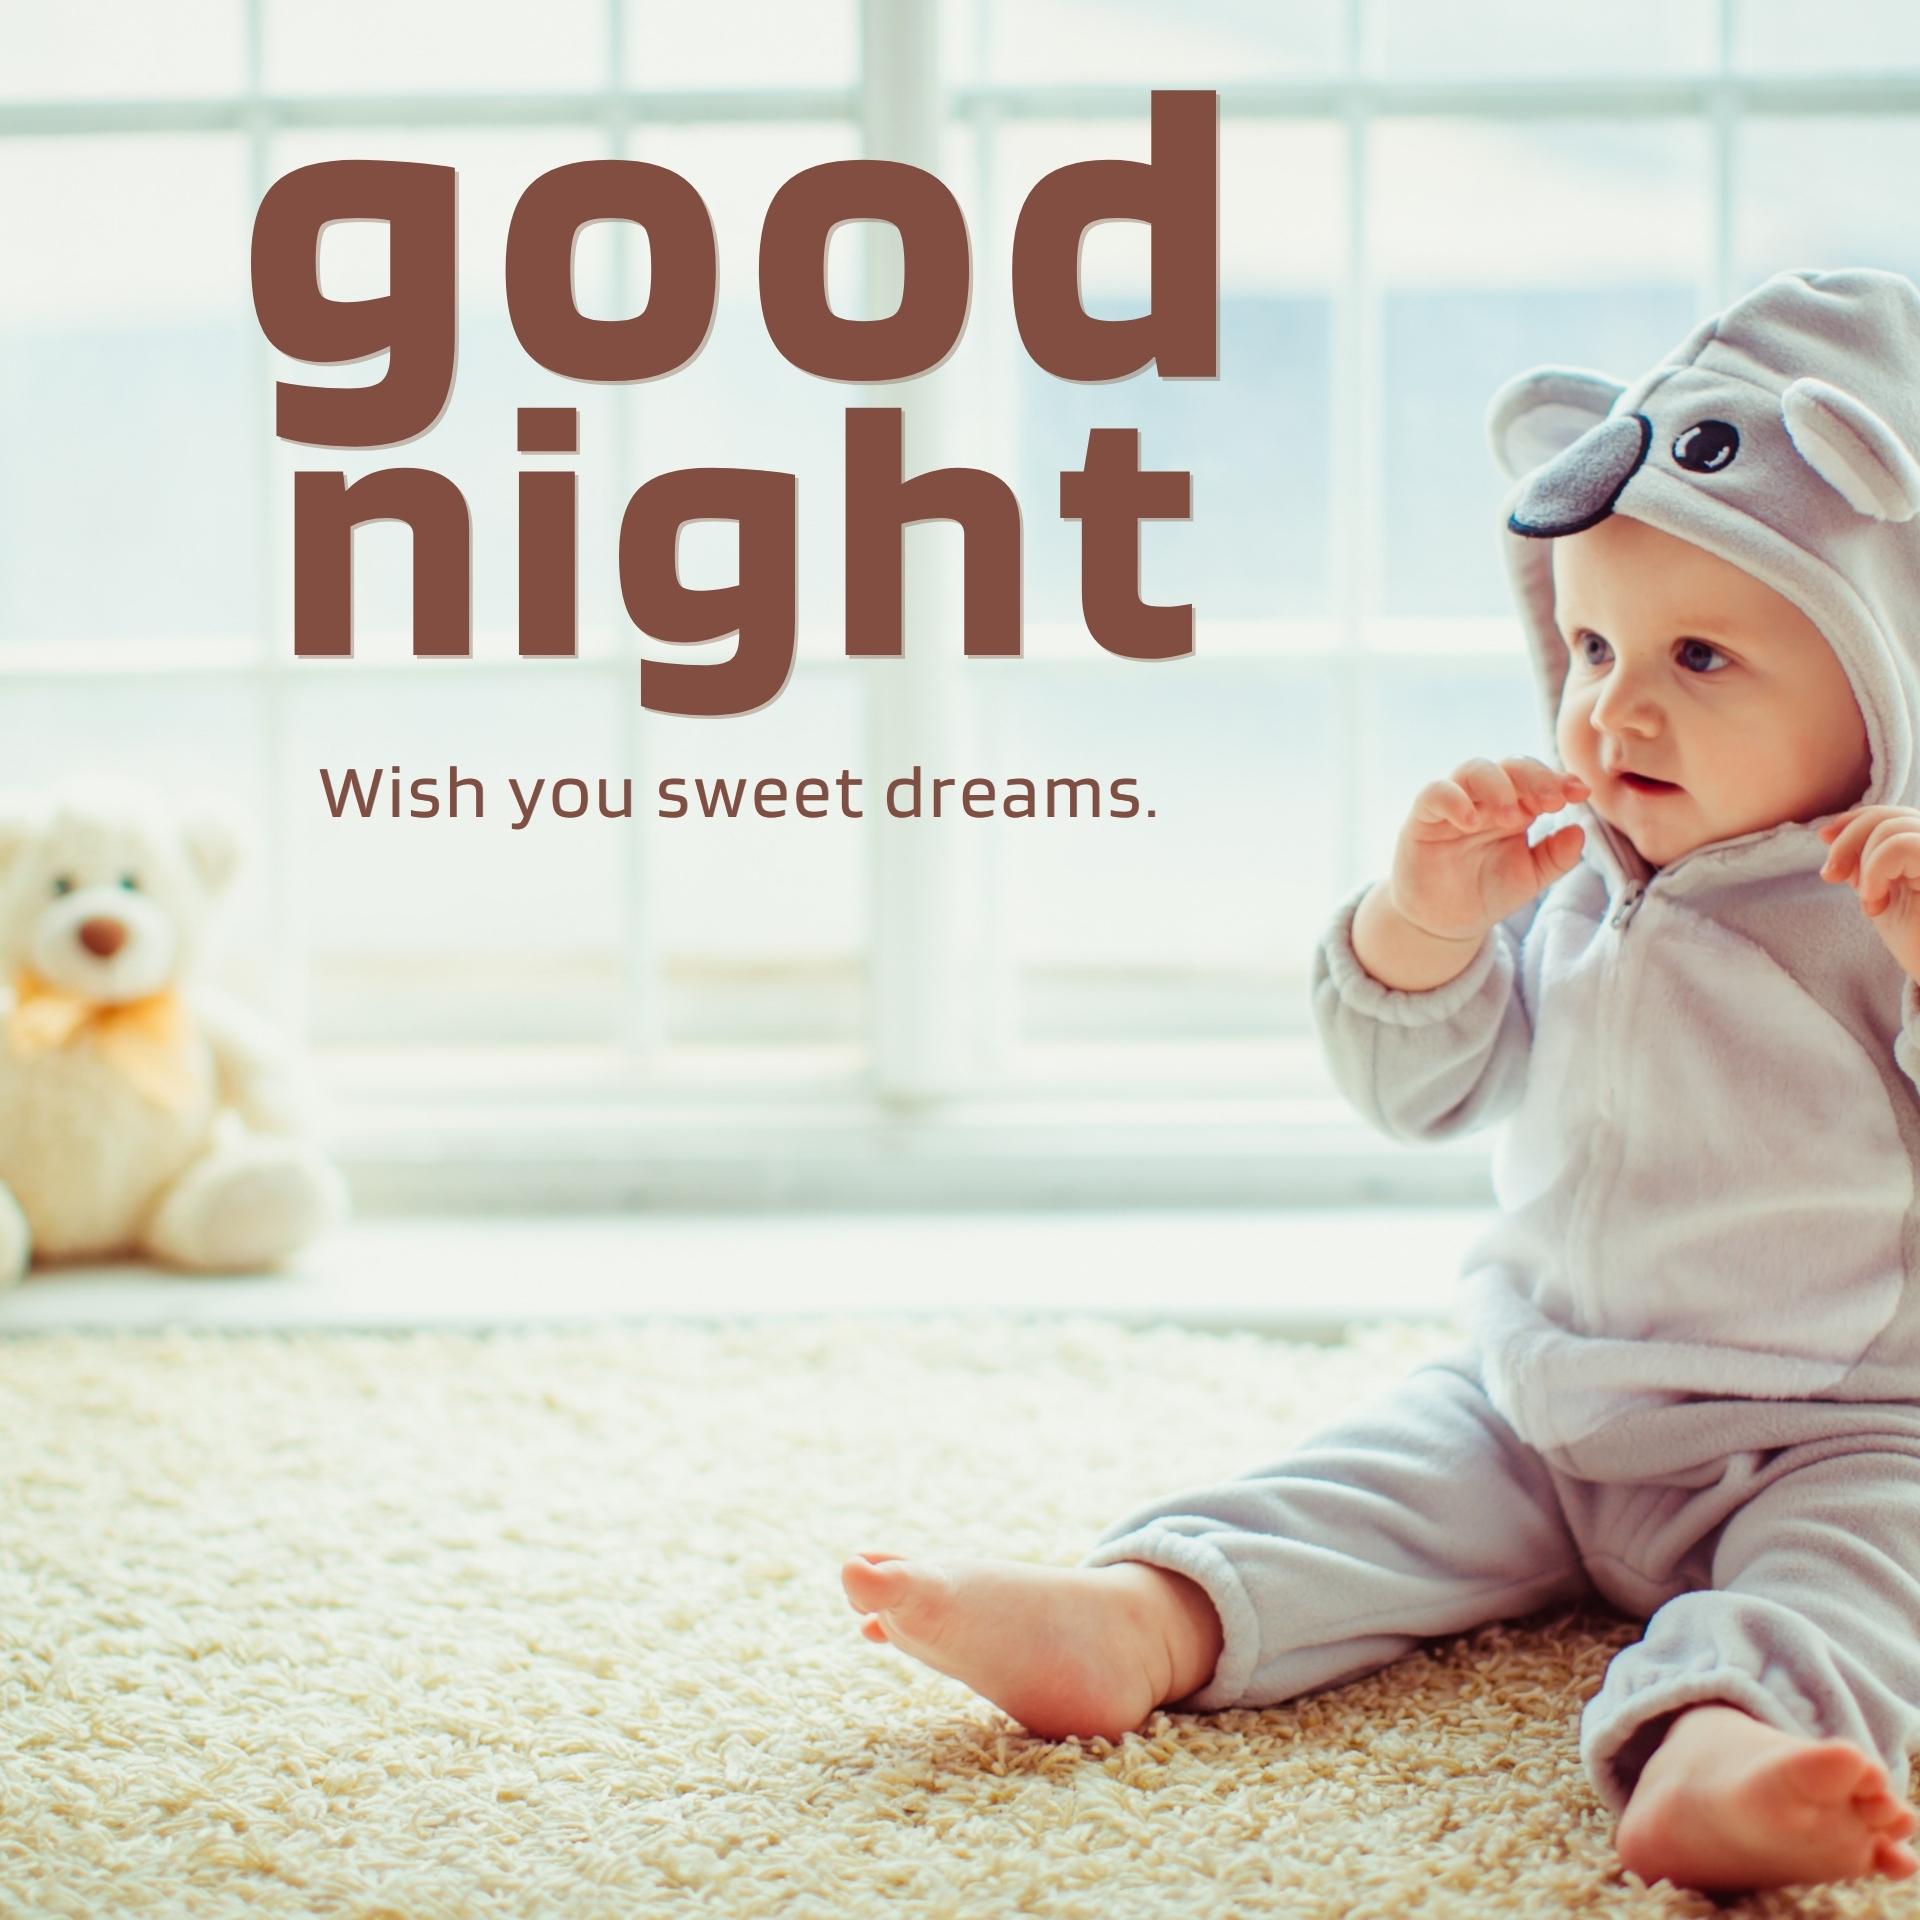 Cute Baby Saying Good Night HD Images